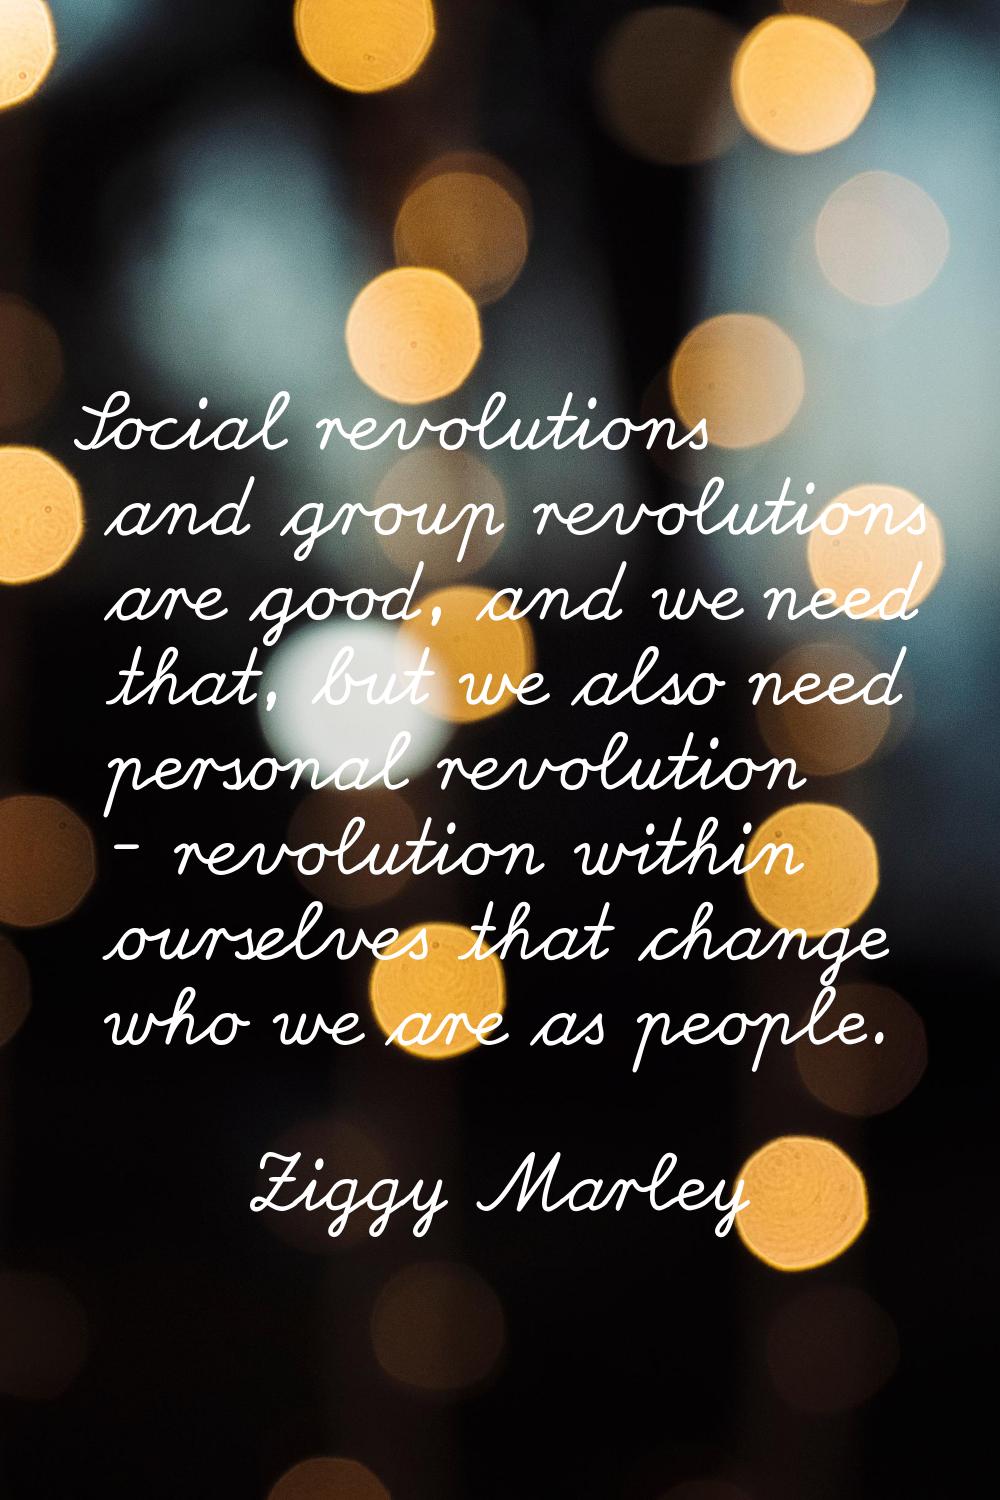 Social revolutions and group revolutions are good, and we need that, but we also need personal revo